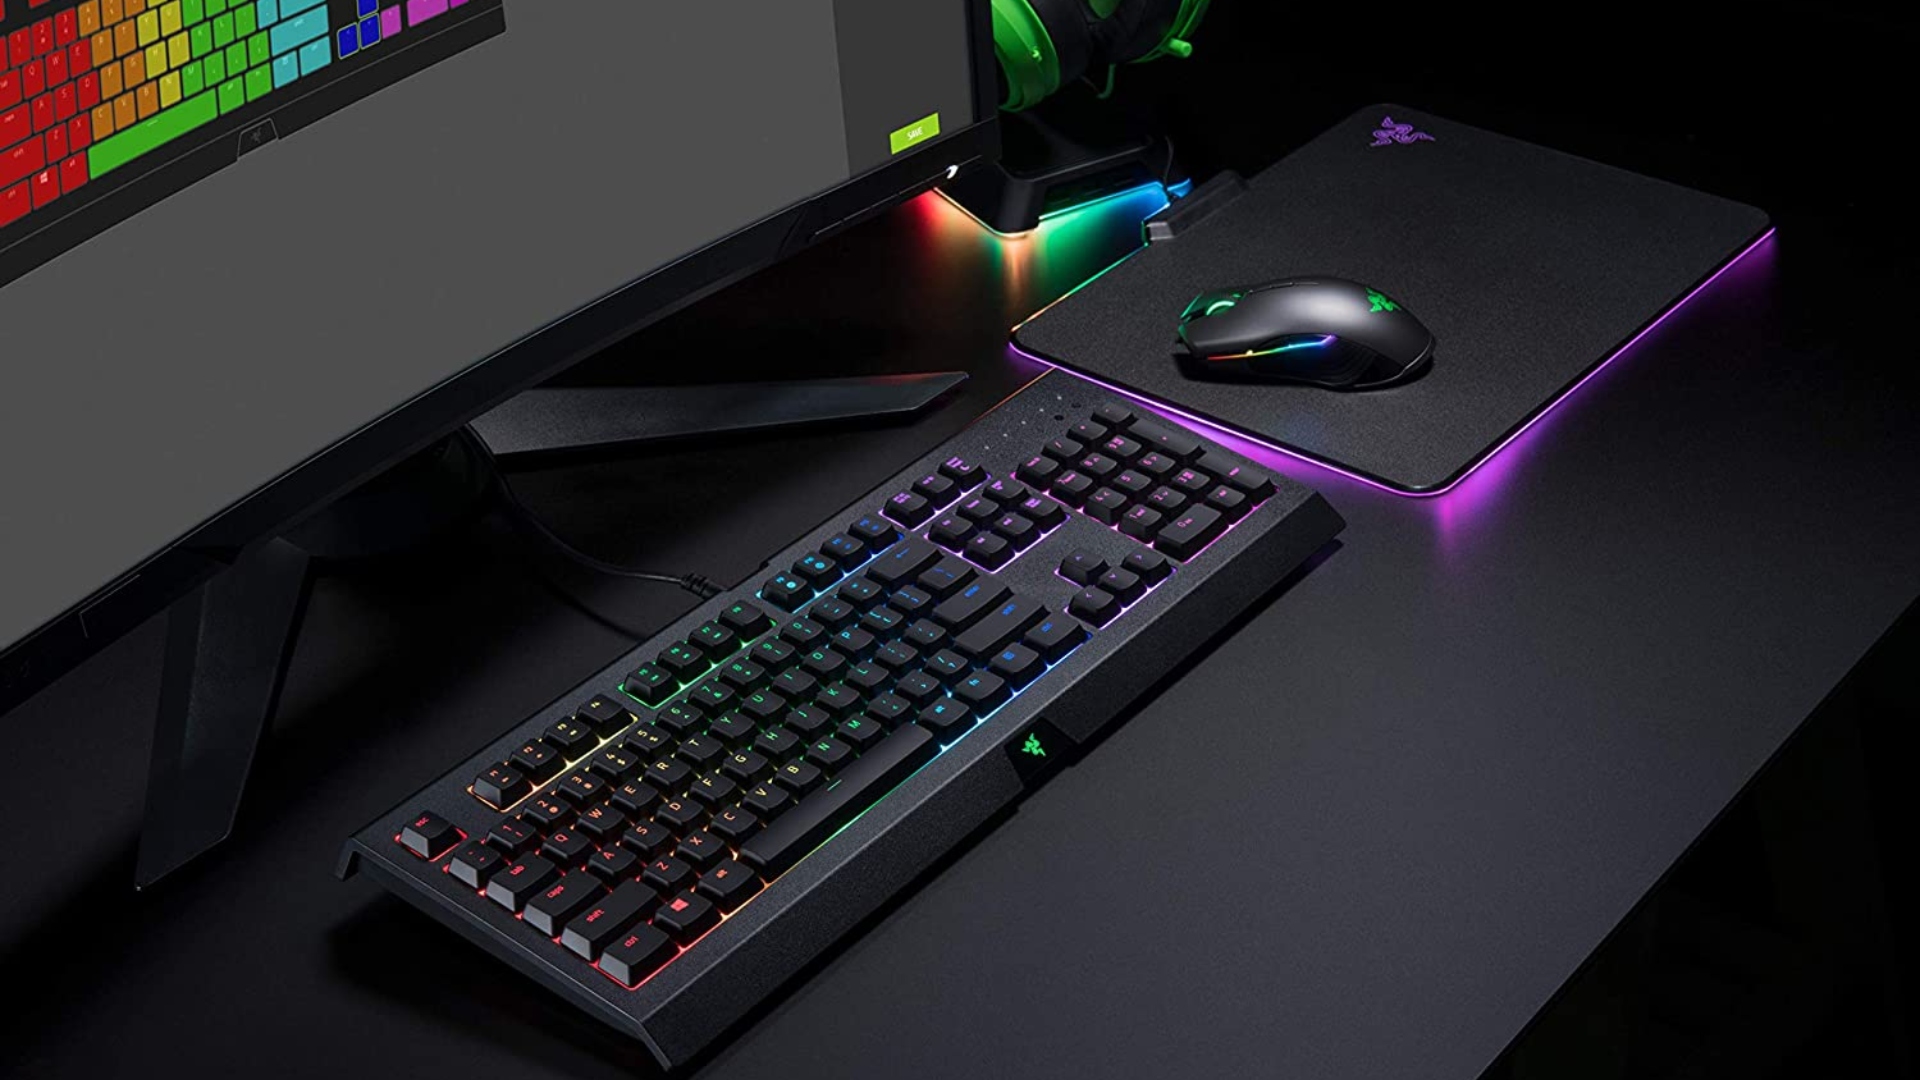 Complete your RGB gaming setup with up to 41% off select RGB products on Amazon